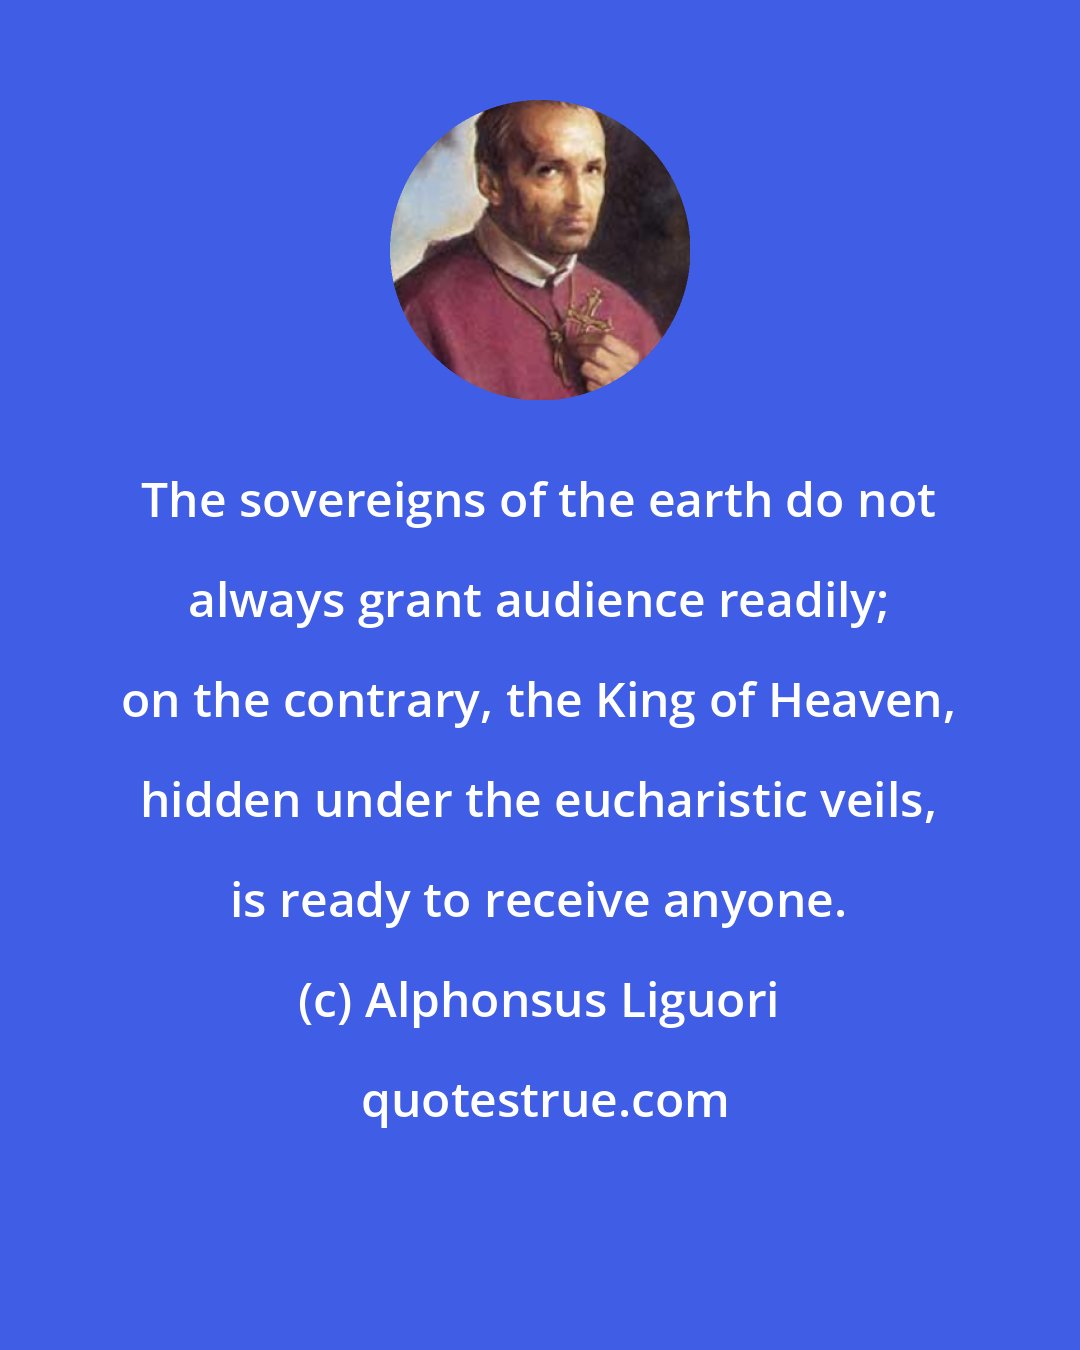 Alphonsus Liguori: The sovereigns of the earth do not always grant audience readily; on the contrary, the King of Heaven, hidden under the eucharistic veils, is ready to receive anyone.